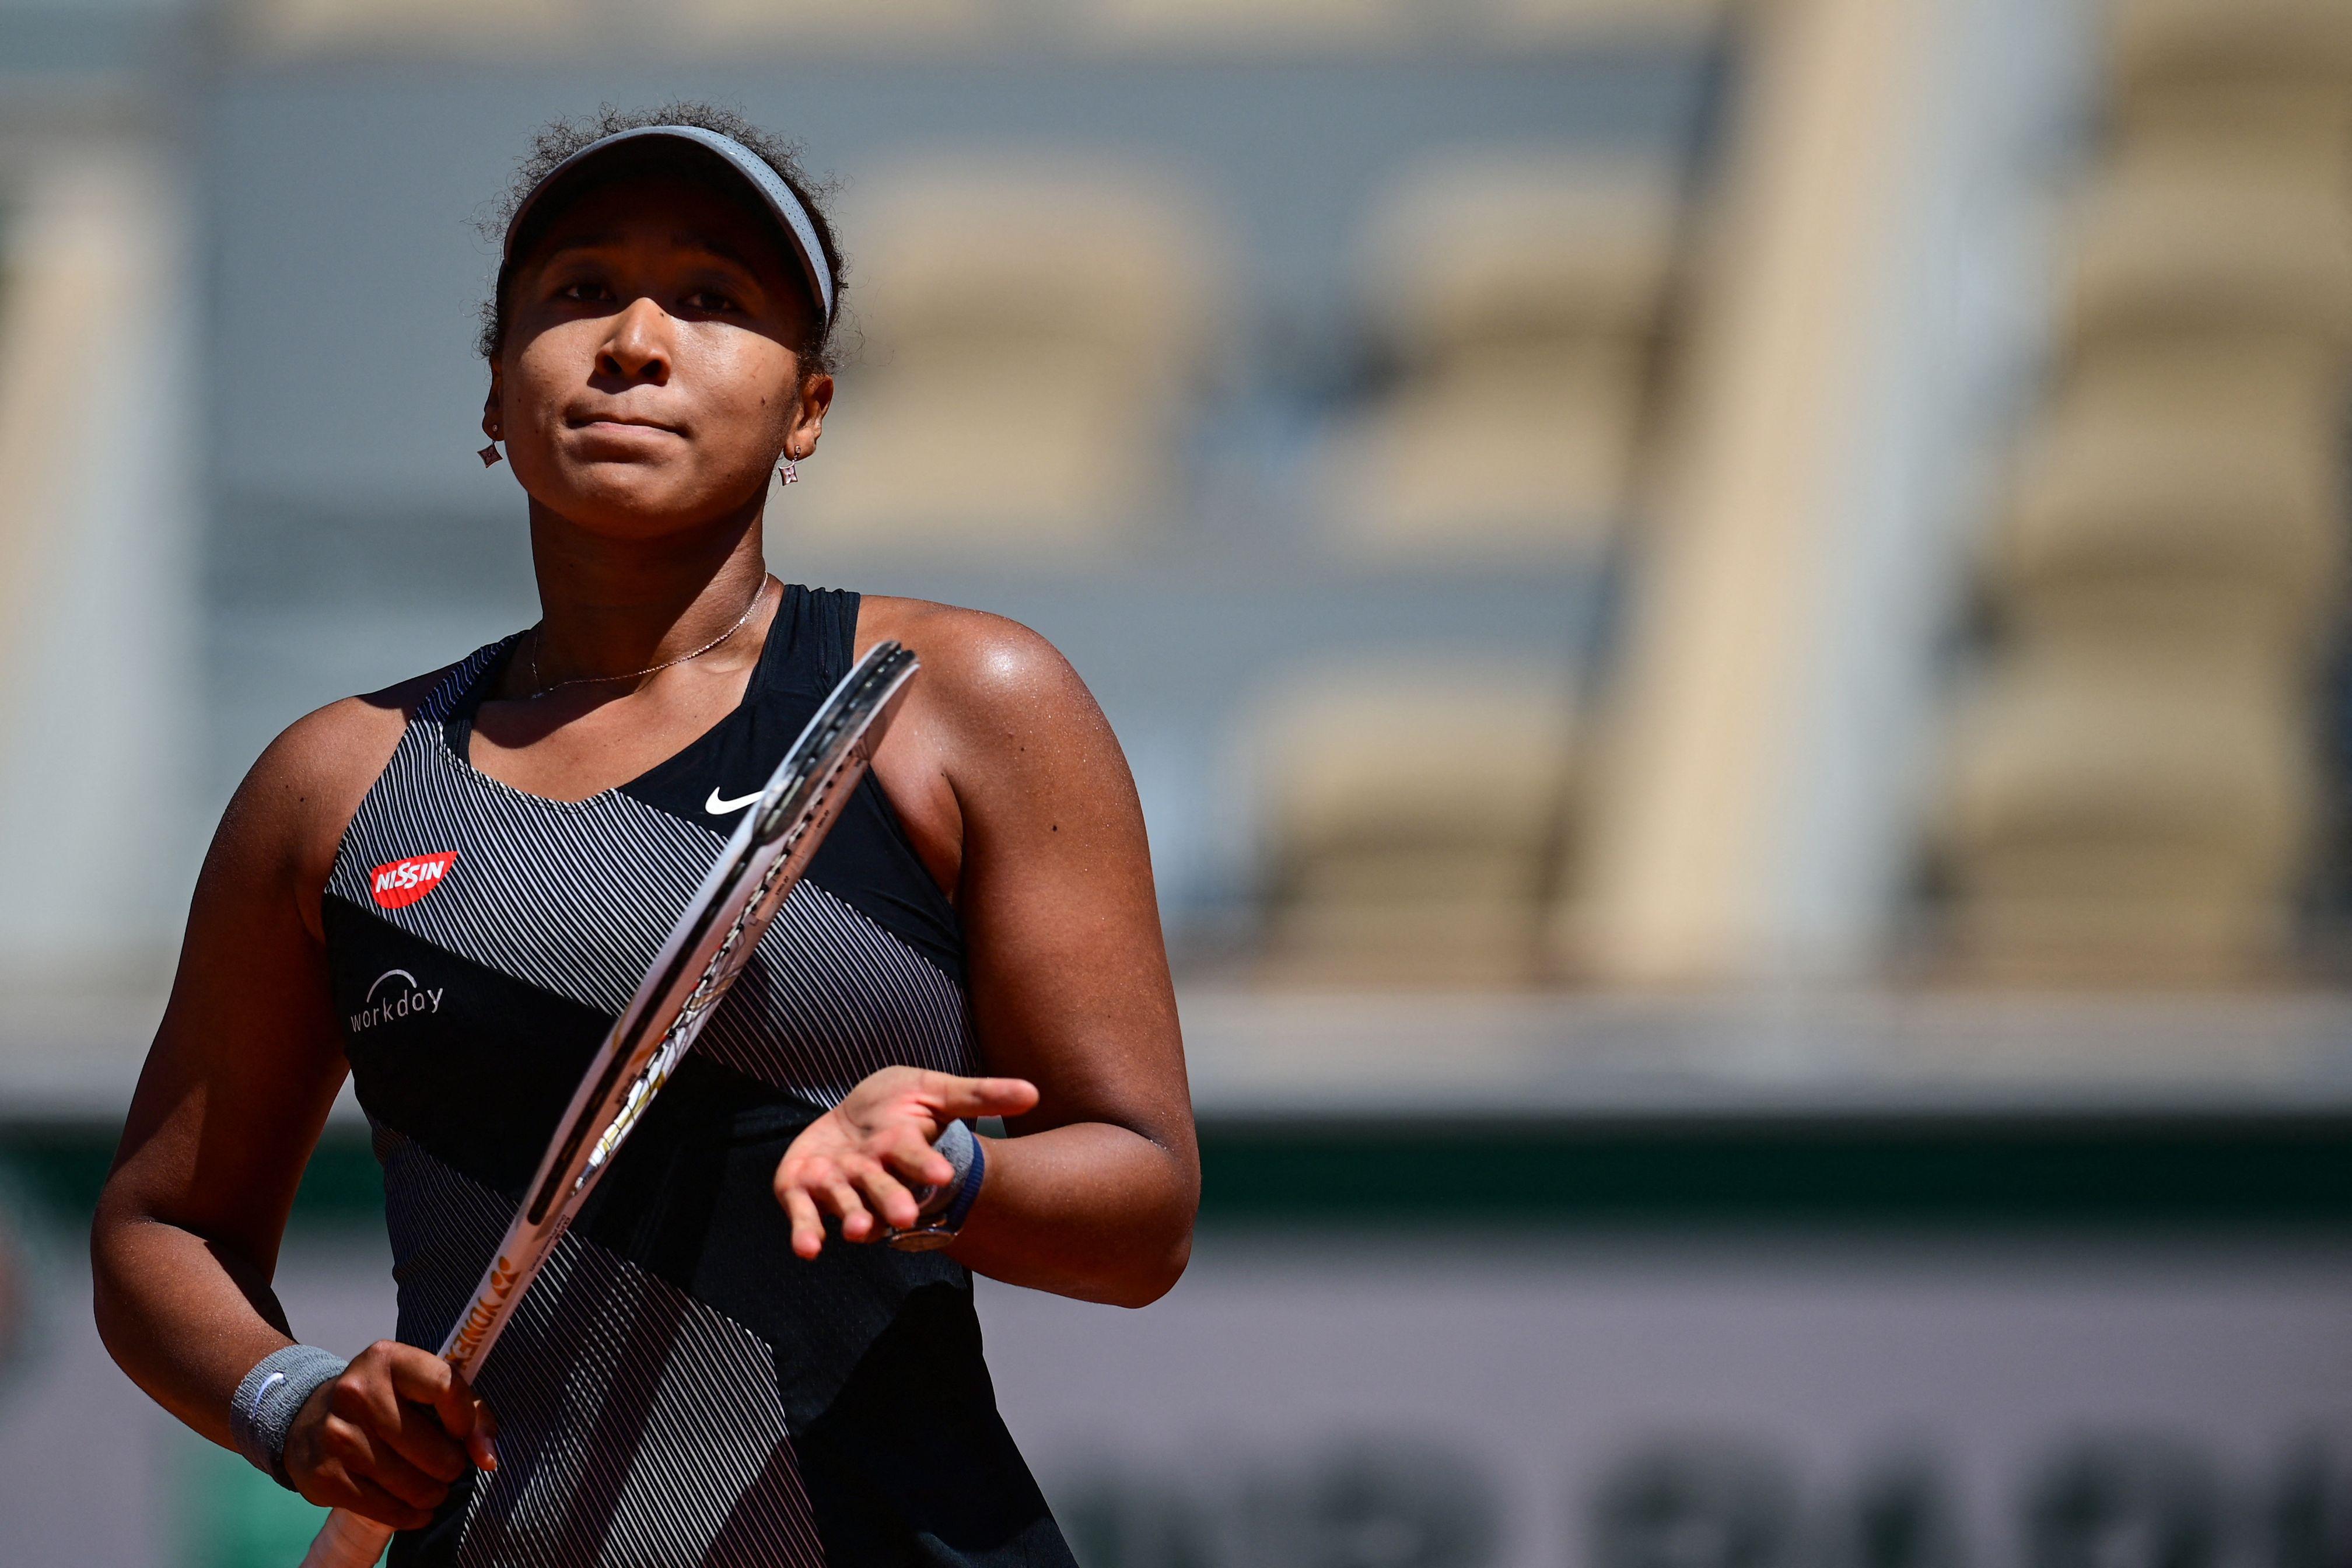 Japan's Naomi Osaka celebrates after winning against Romania's Patricia Maria Tig during their women's singles first round tennis match on Day 1 of The Roland Garros 2021 French Open tennis tournament in Paris on May 30, 2021.